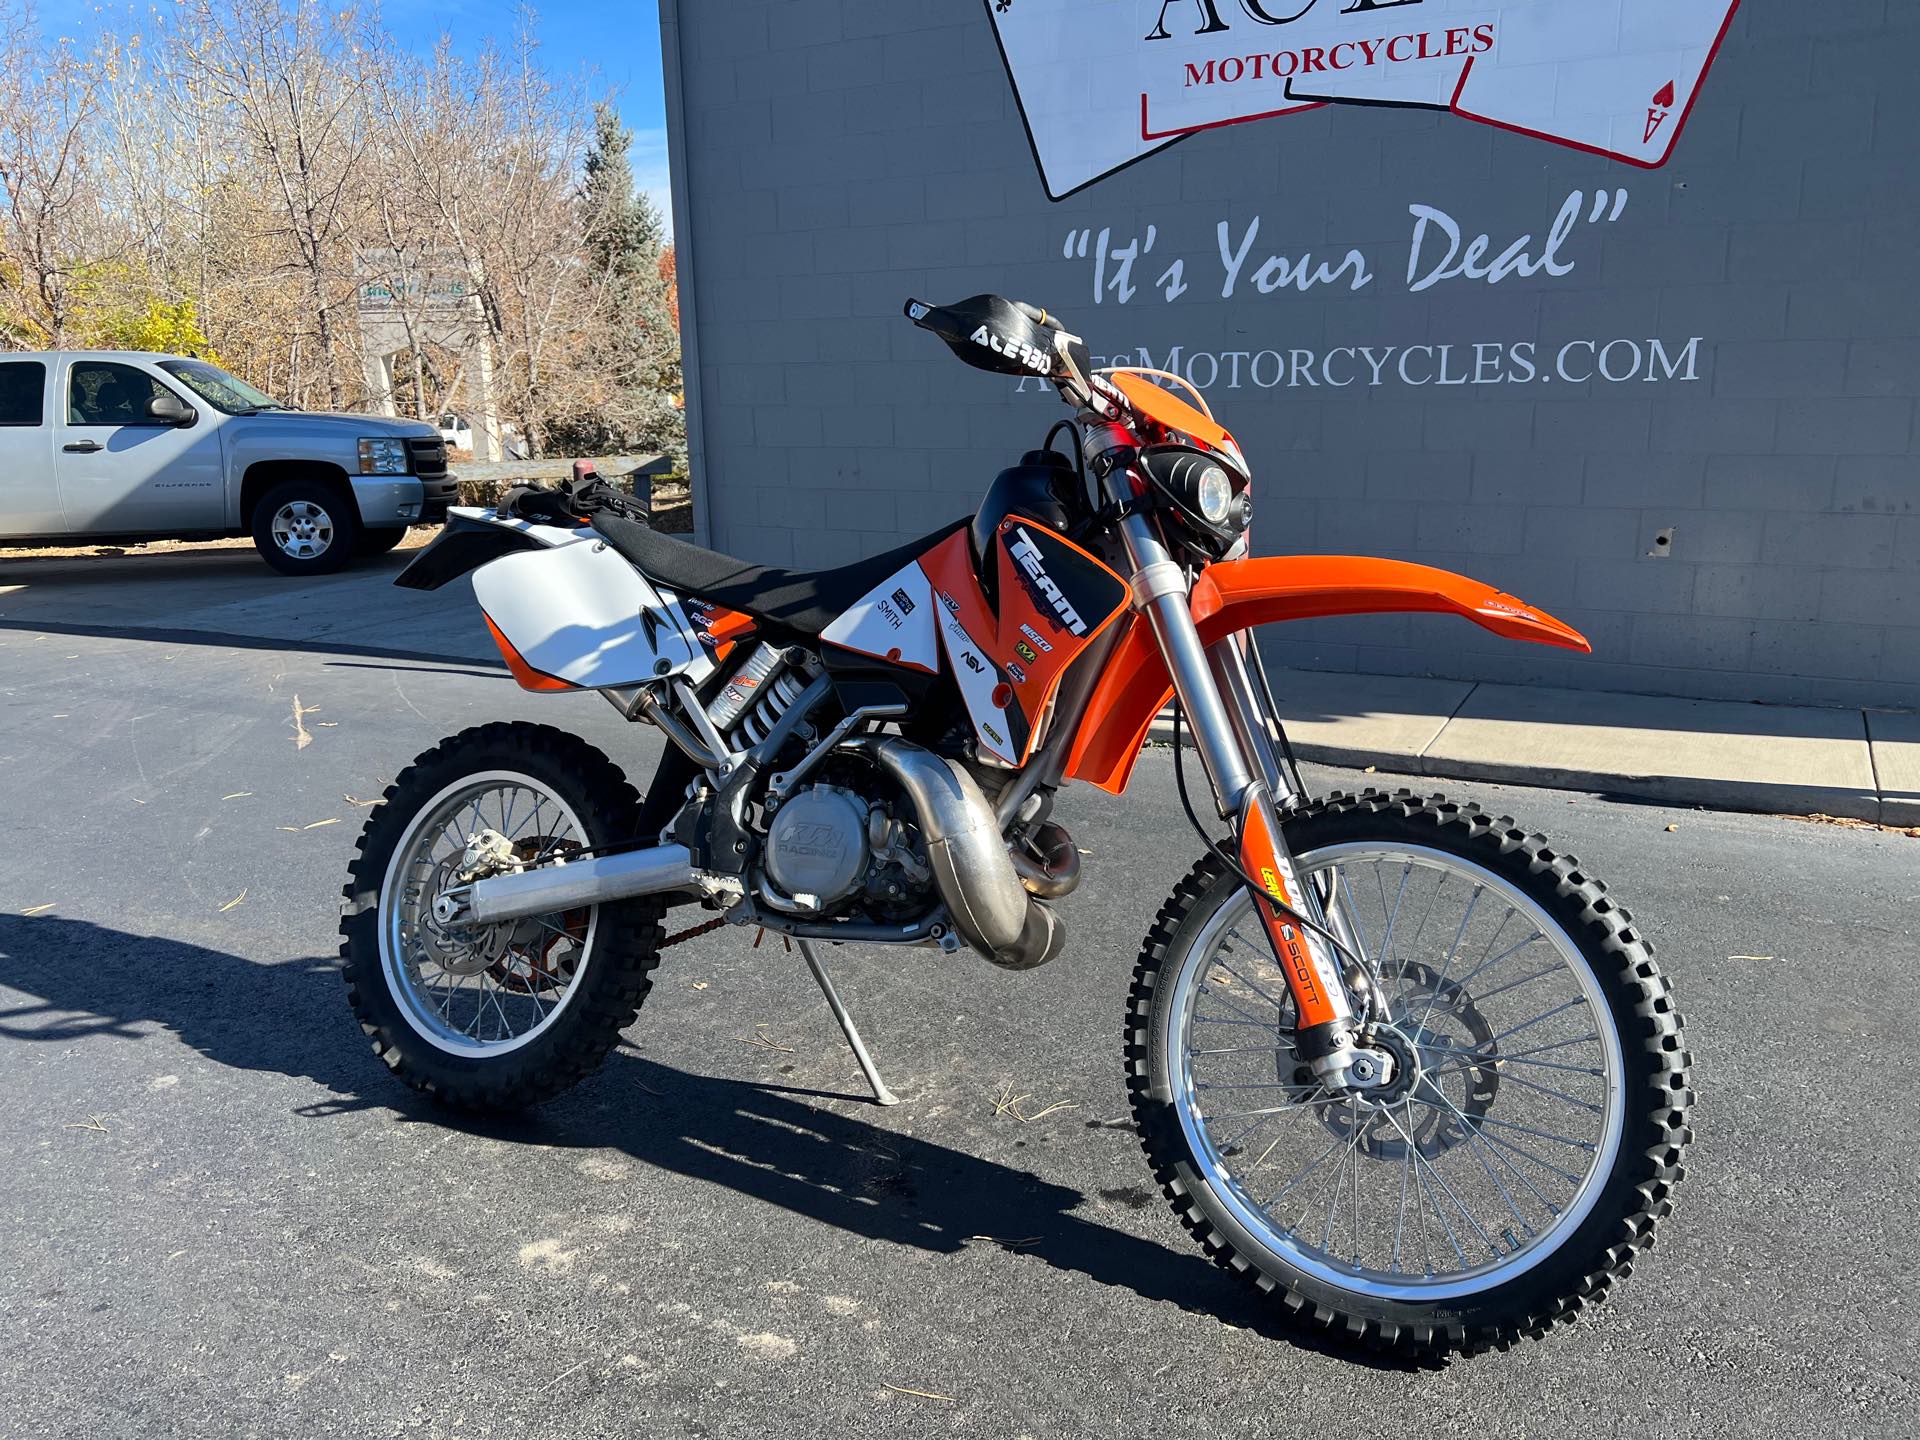 2001 KTM 380 at Aces Motorcycles - Fort Collins